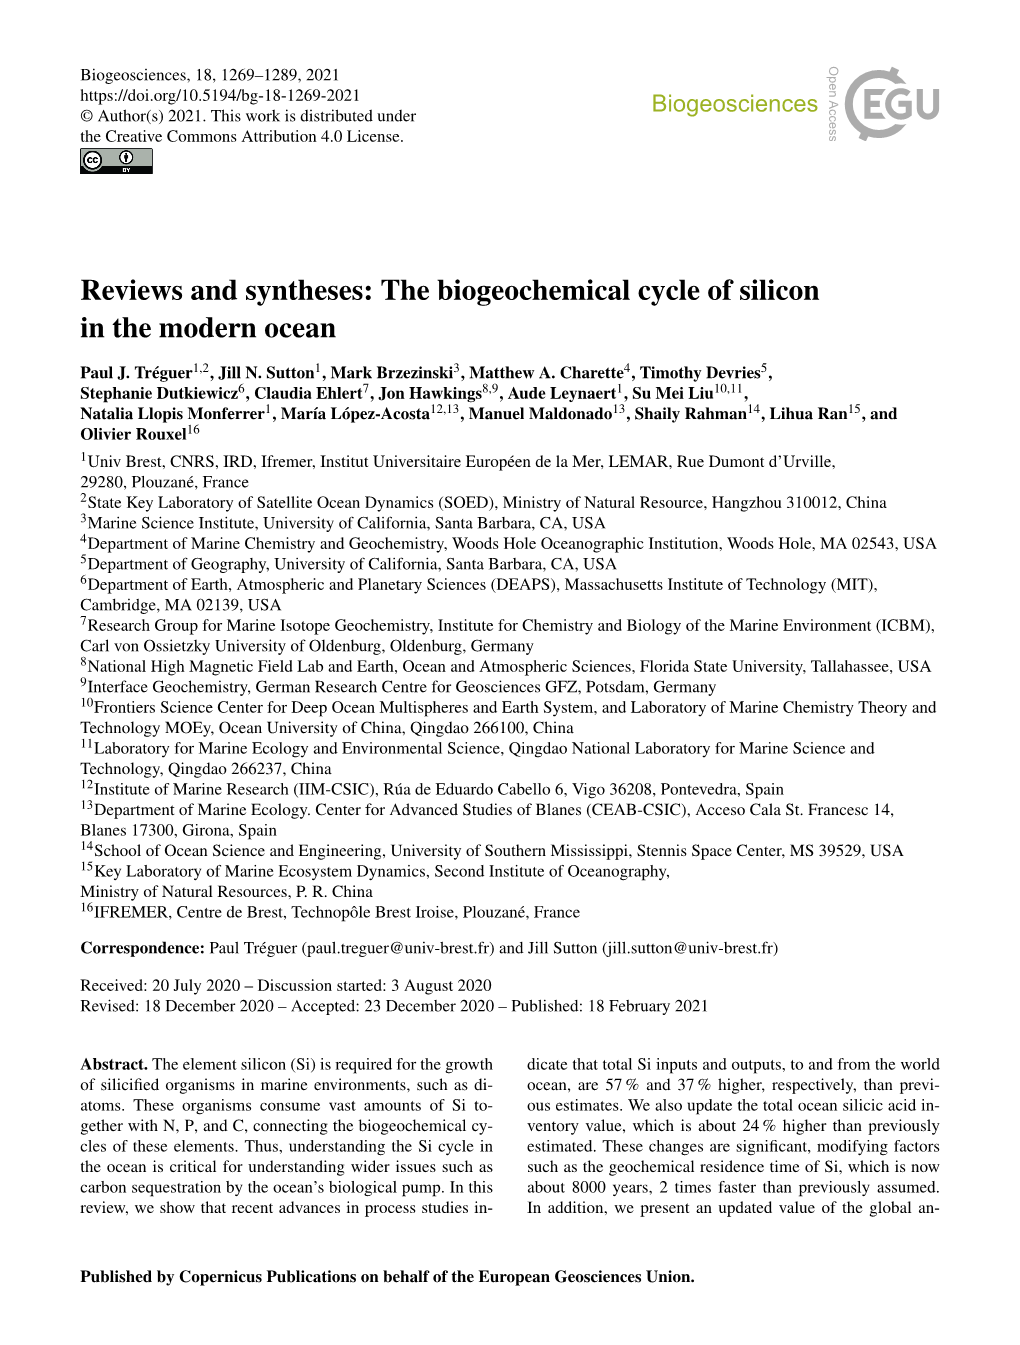 The Biogeochemical Cycle of Silicon in the Modern Ocean